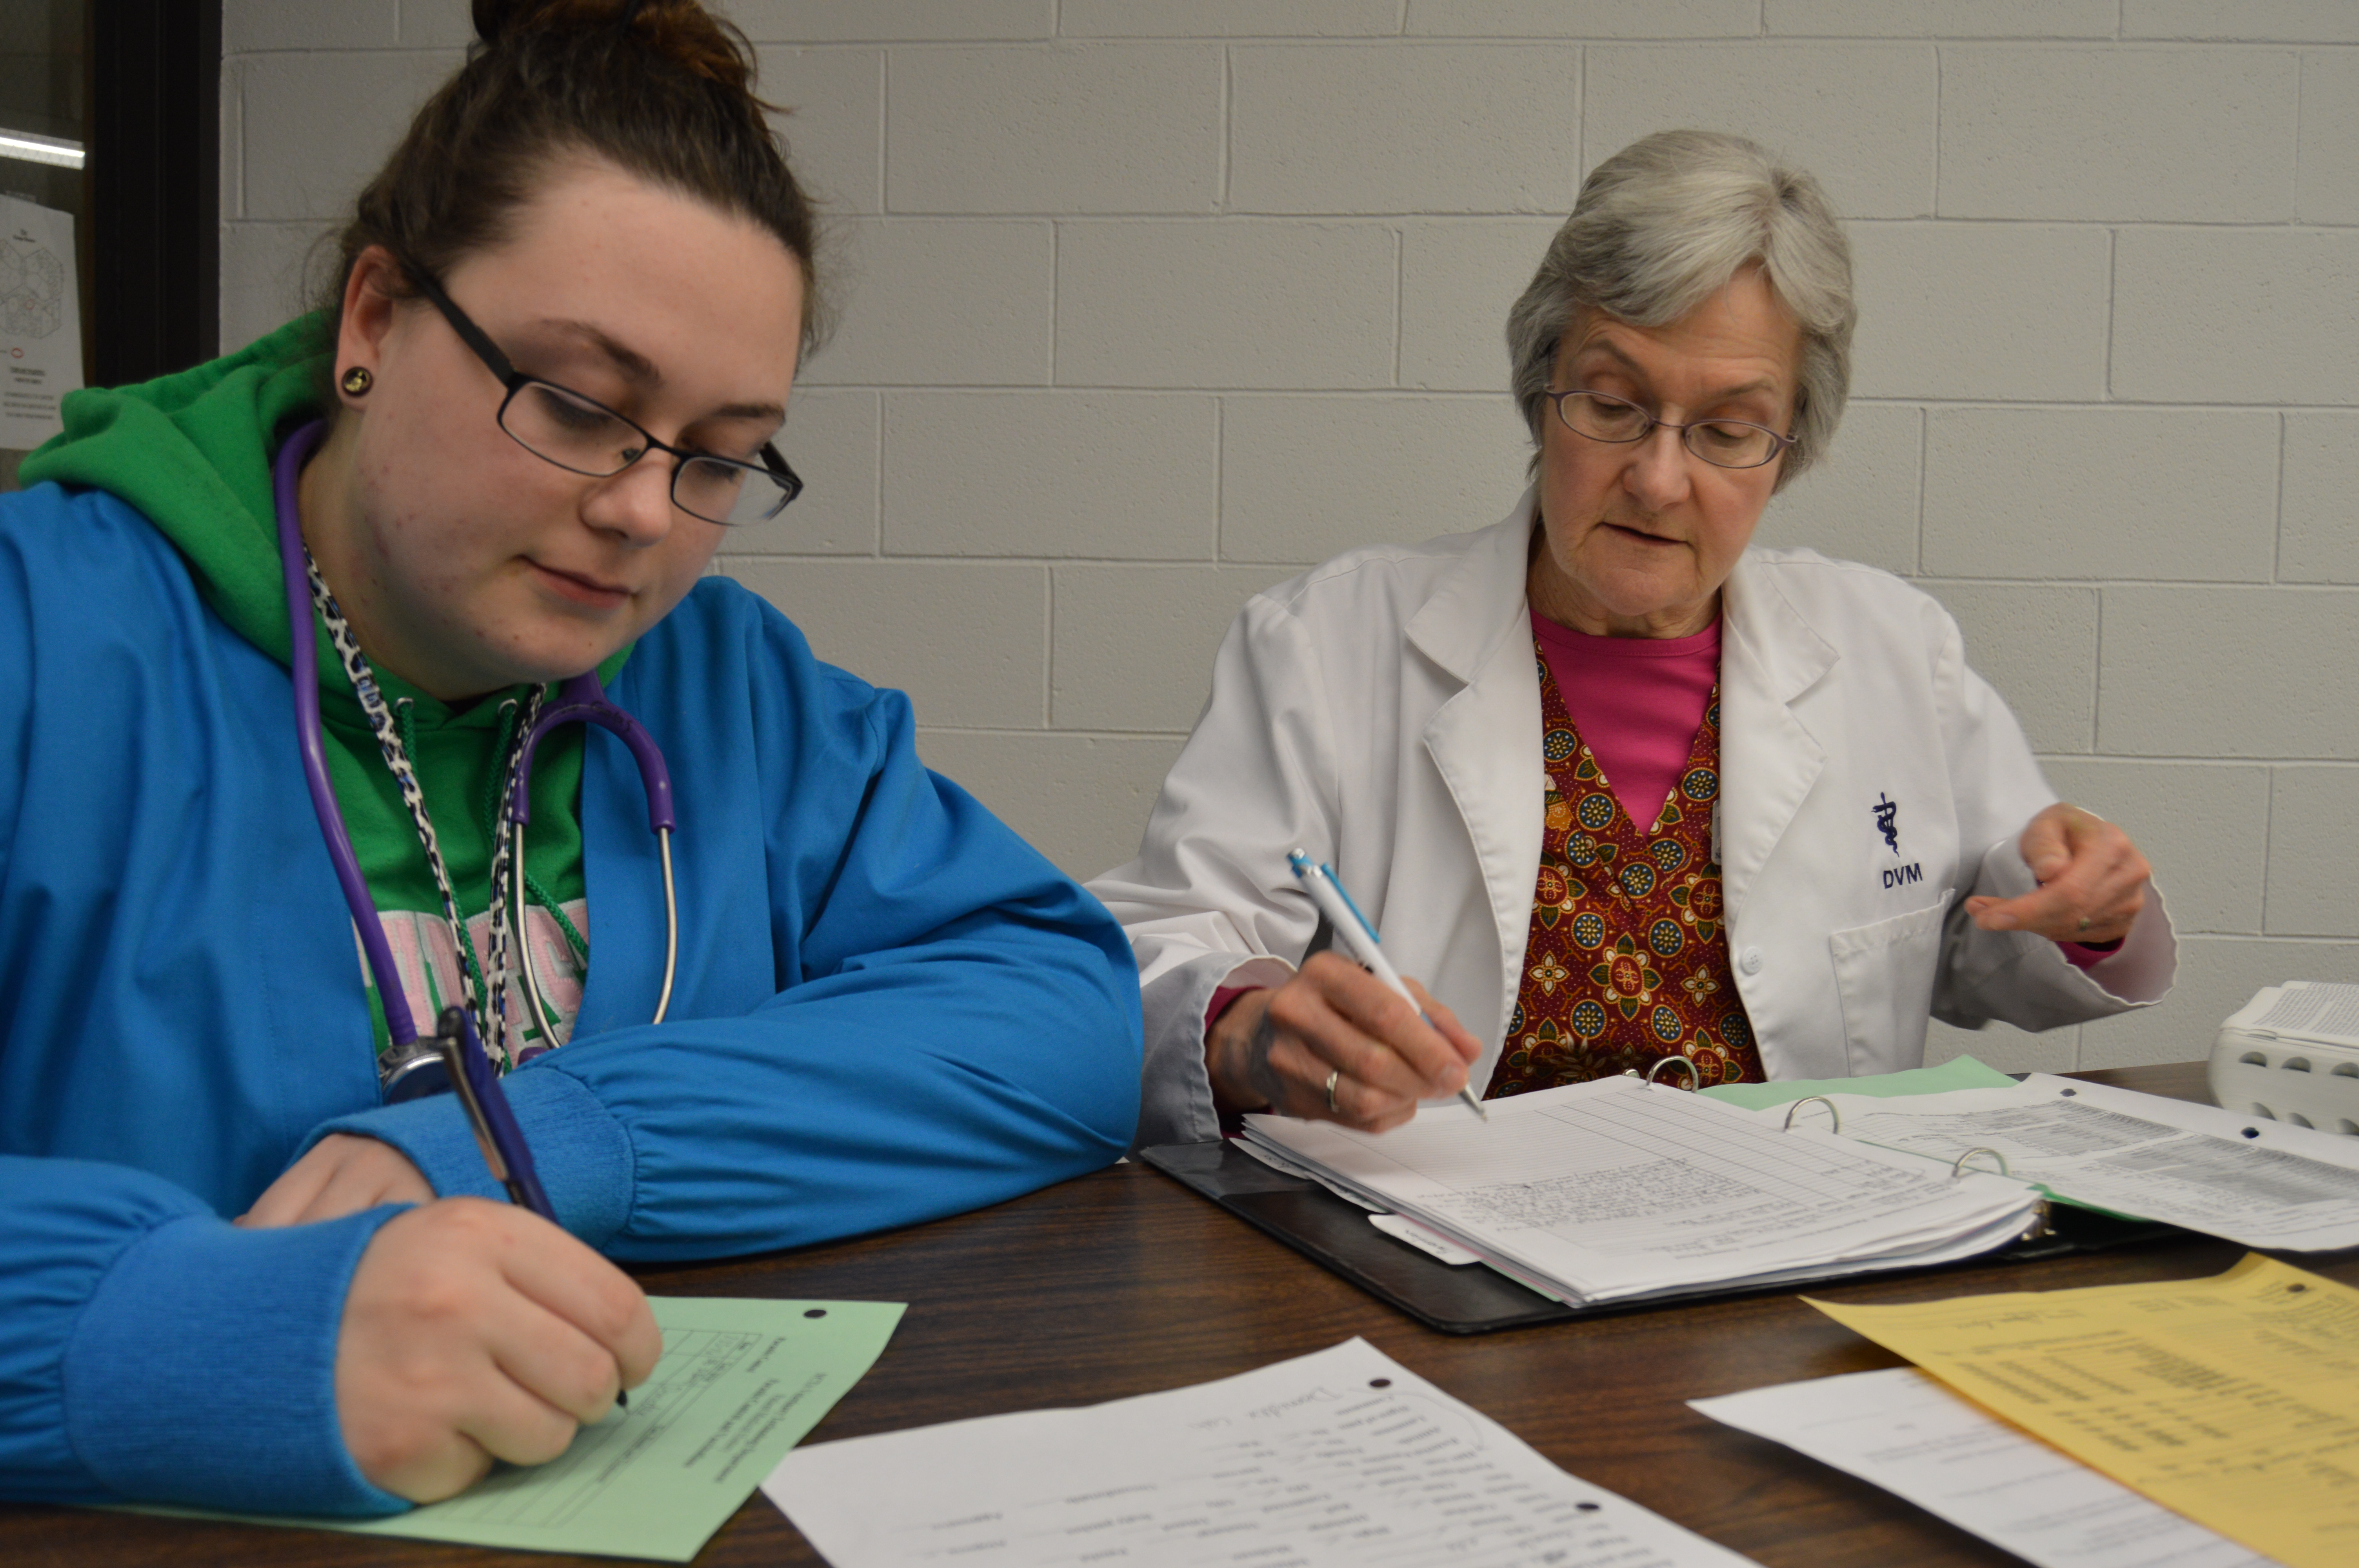 Ricky Sue Barnes, DVM, professor in the NCTA Veterinary Technology division, assists a student with surgery reports. (Crawford/NCTA News Photo)